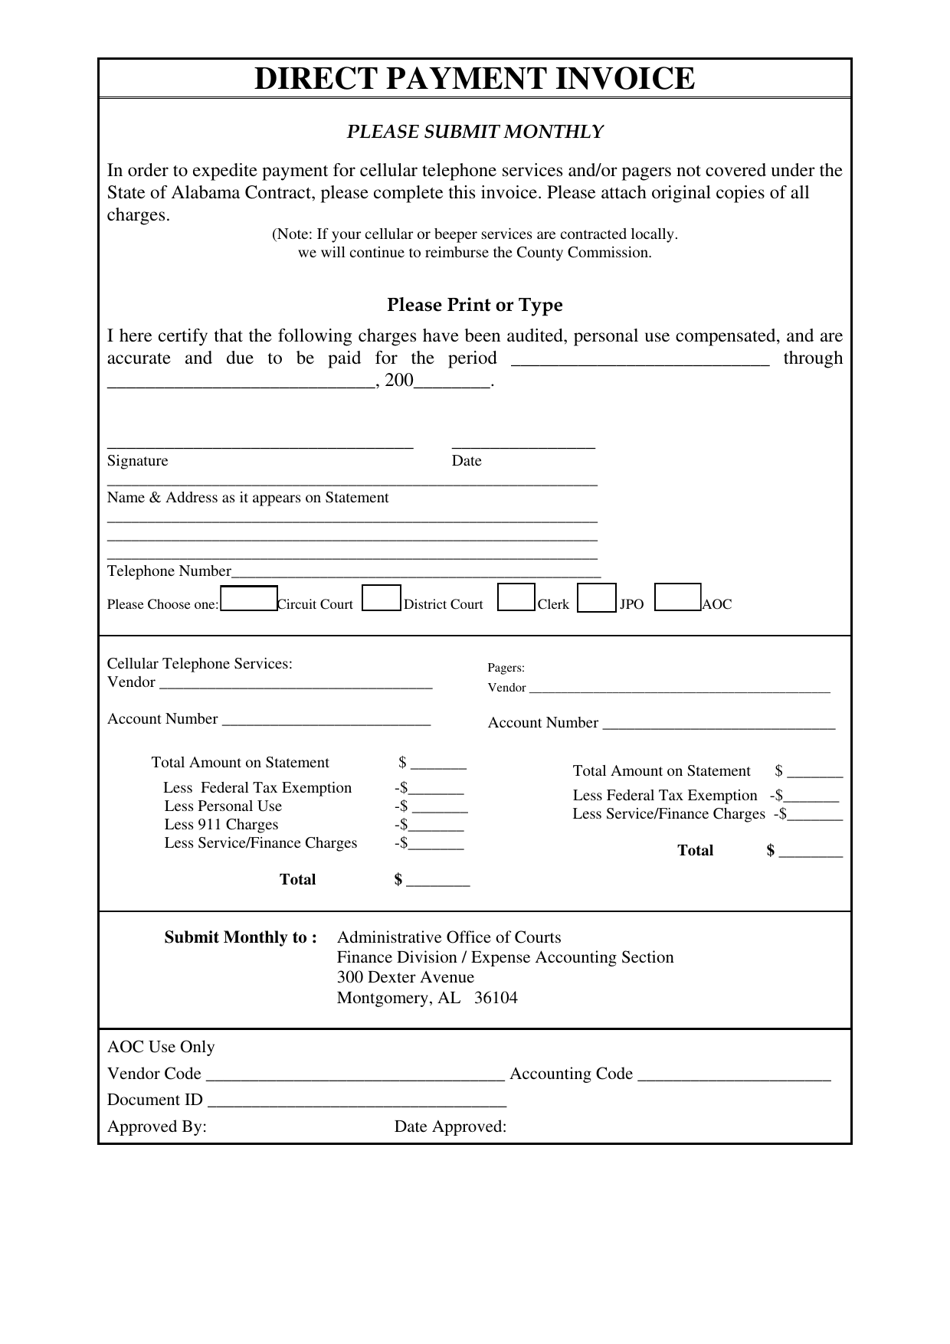 Direct Payment Invoice - Alabama, Page 1